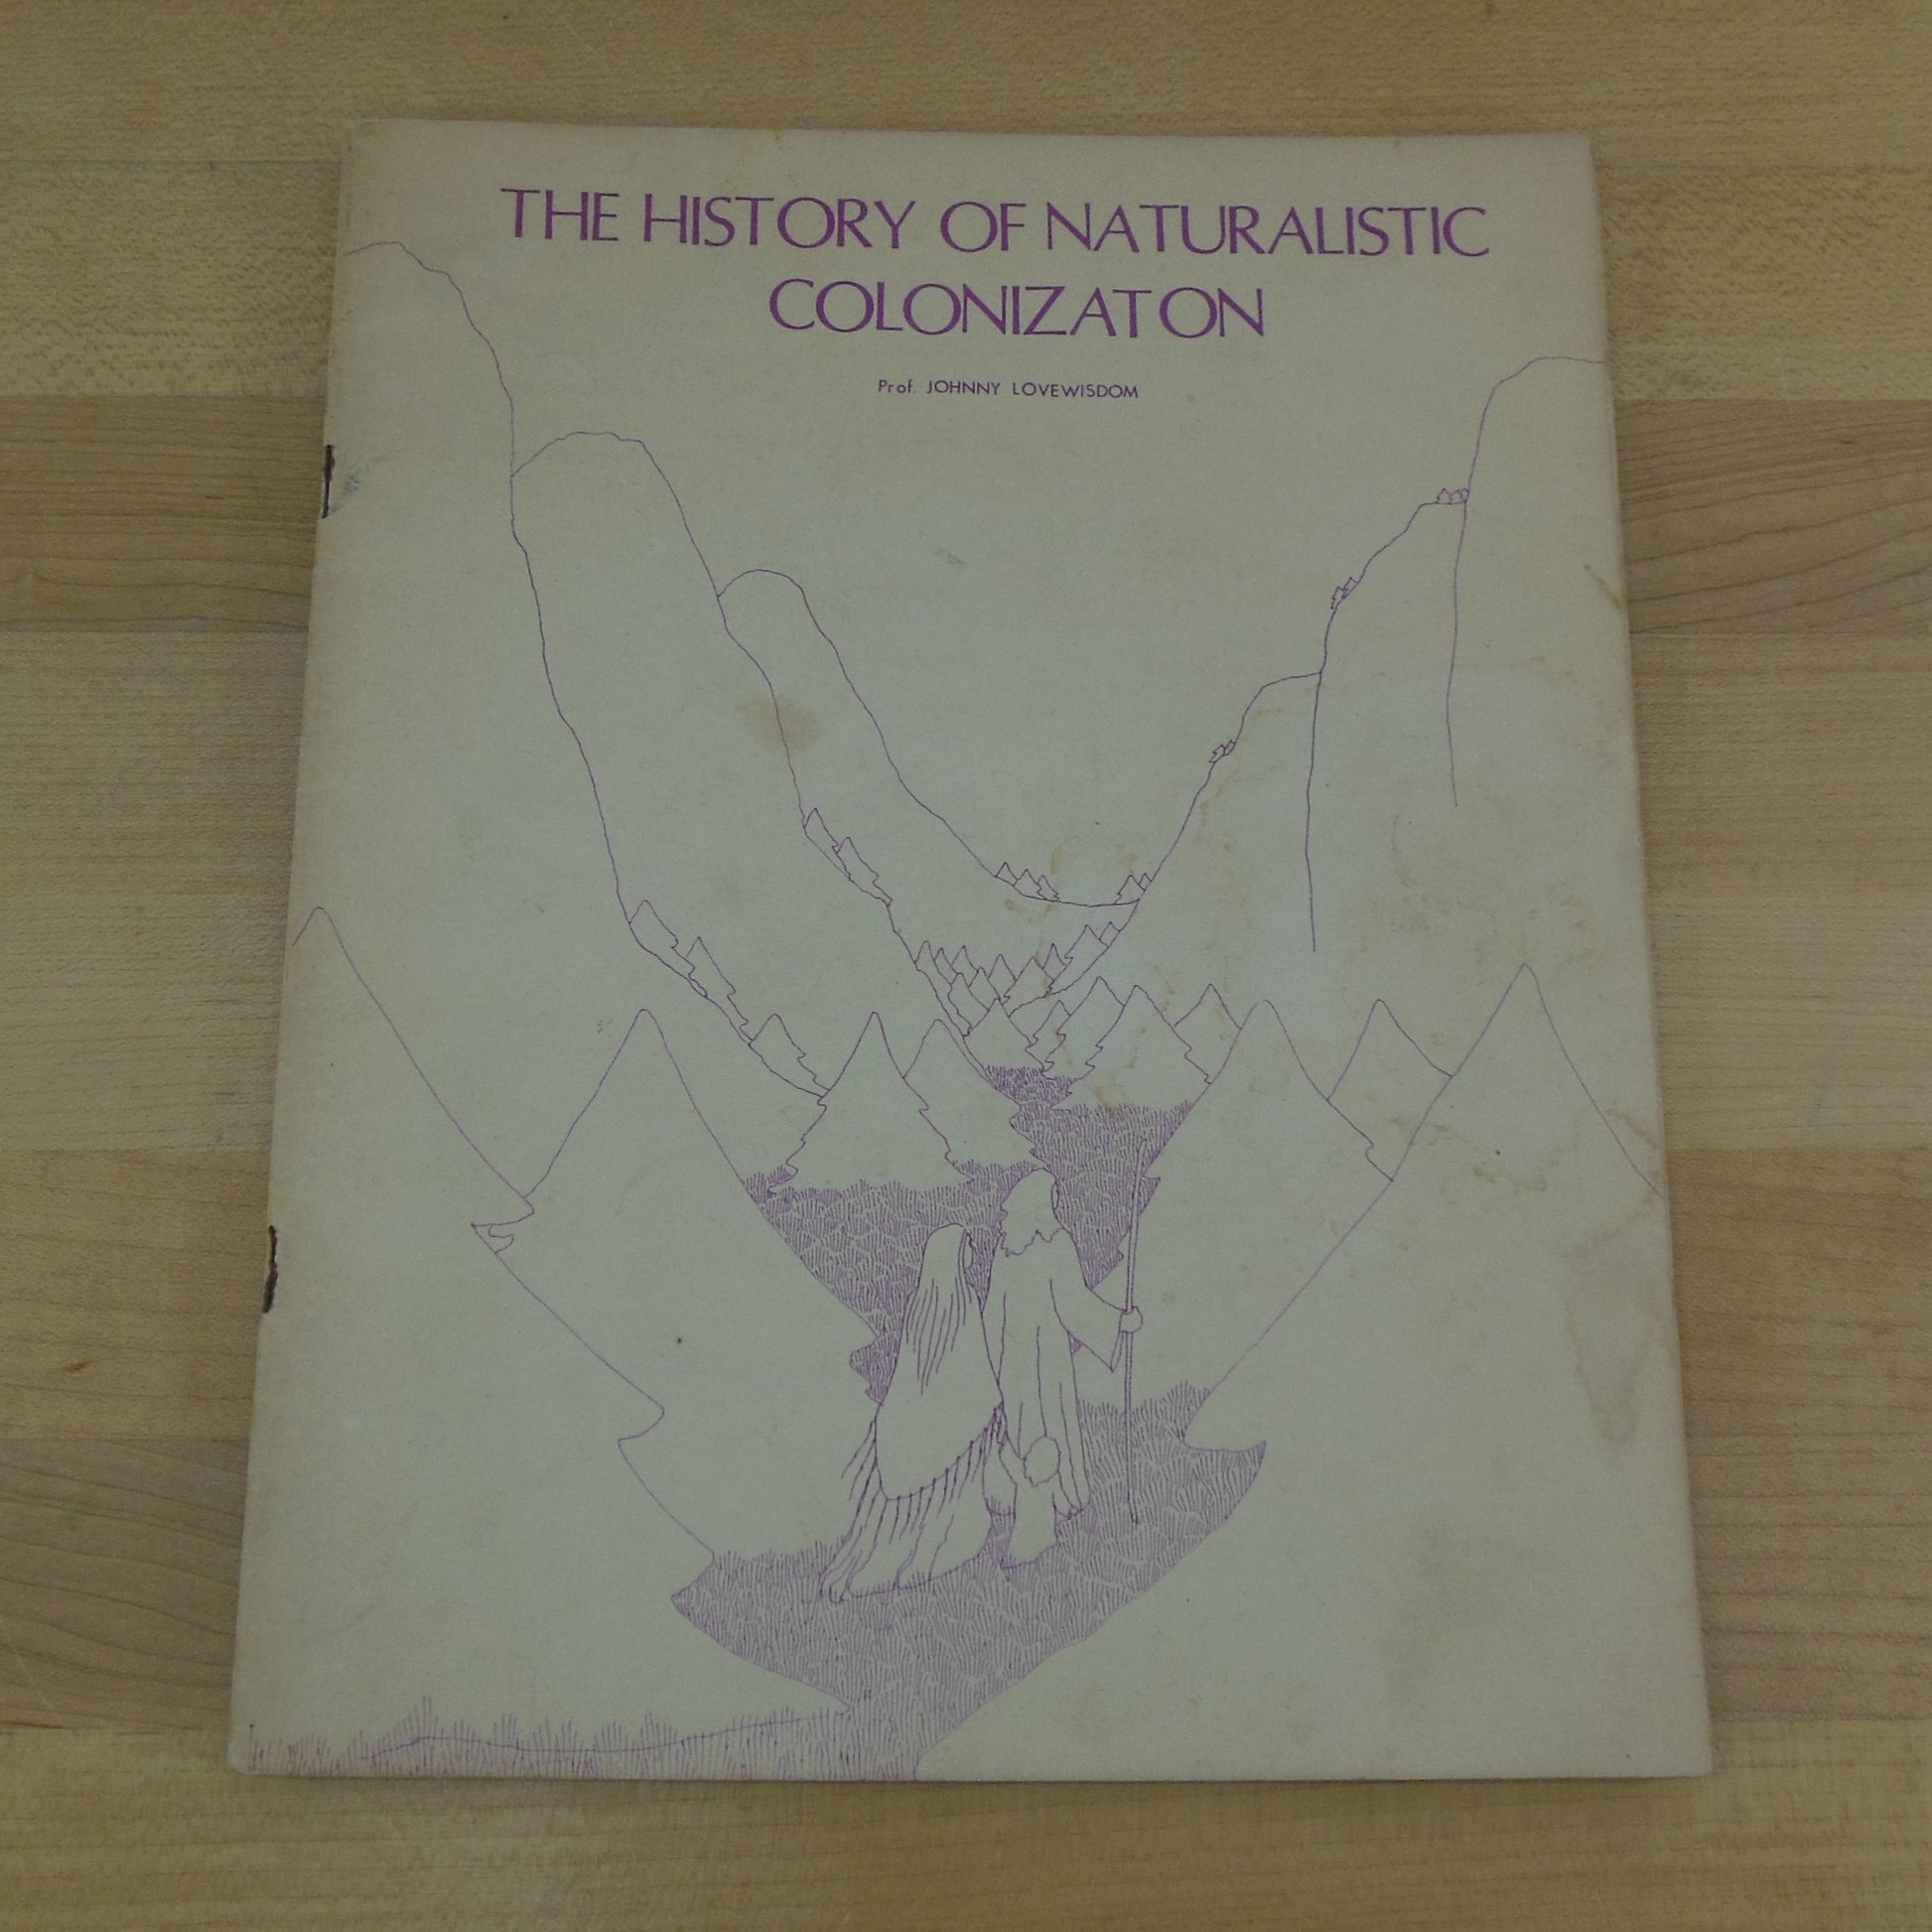 The History of Naturalistic Colonization Johnny Lovewisdom Esoteric Book